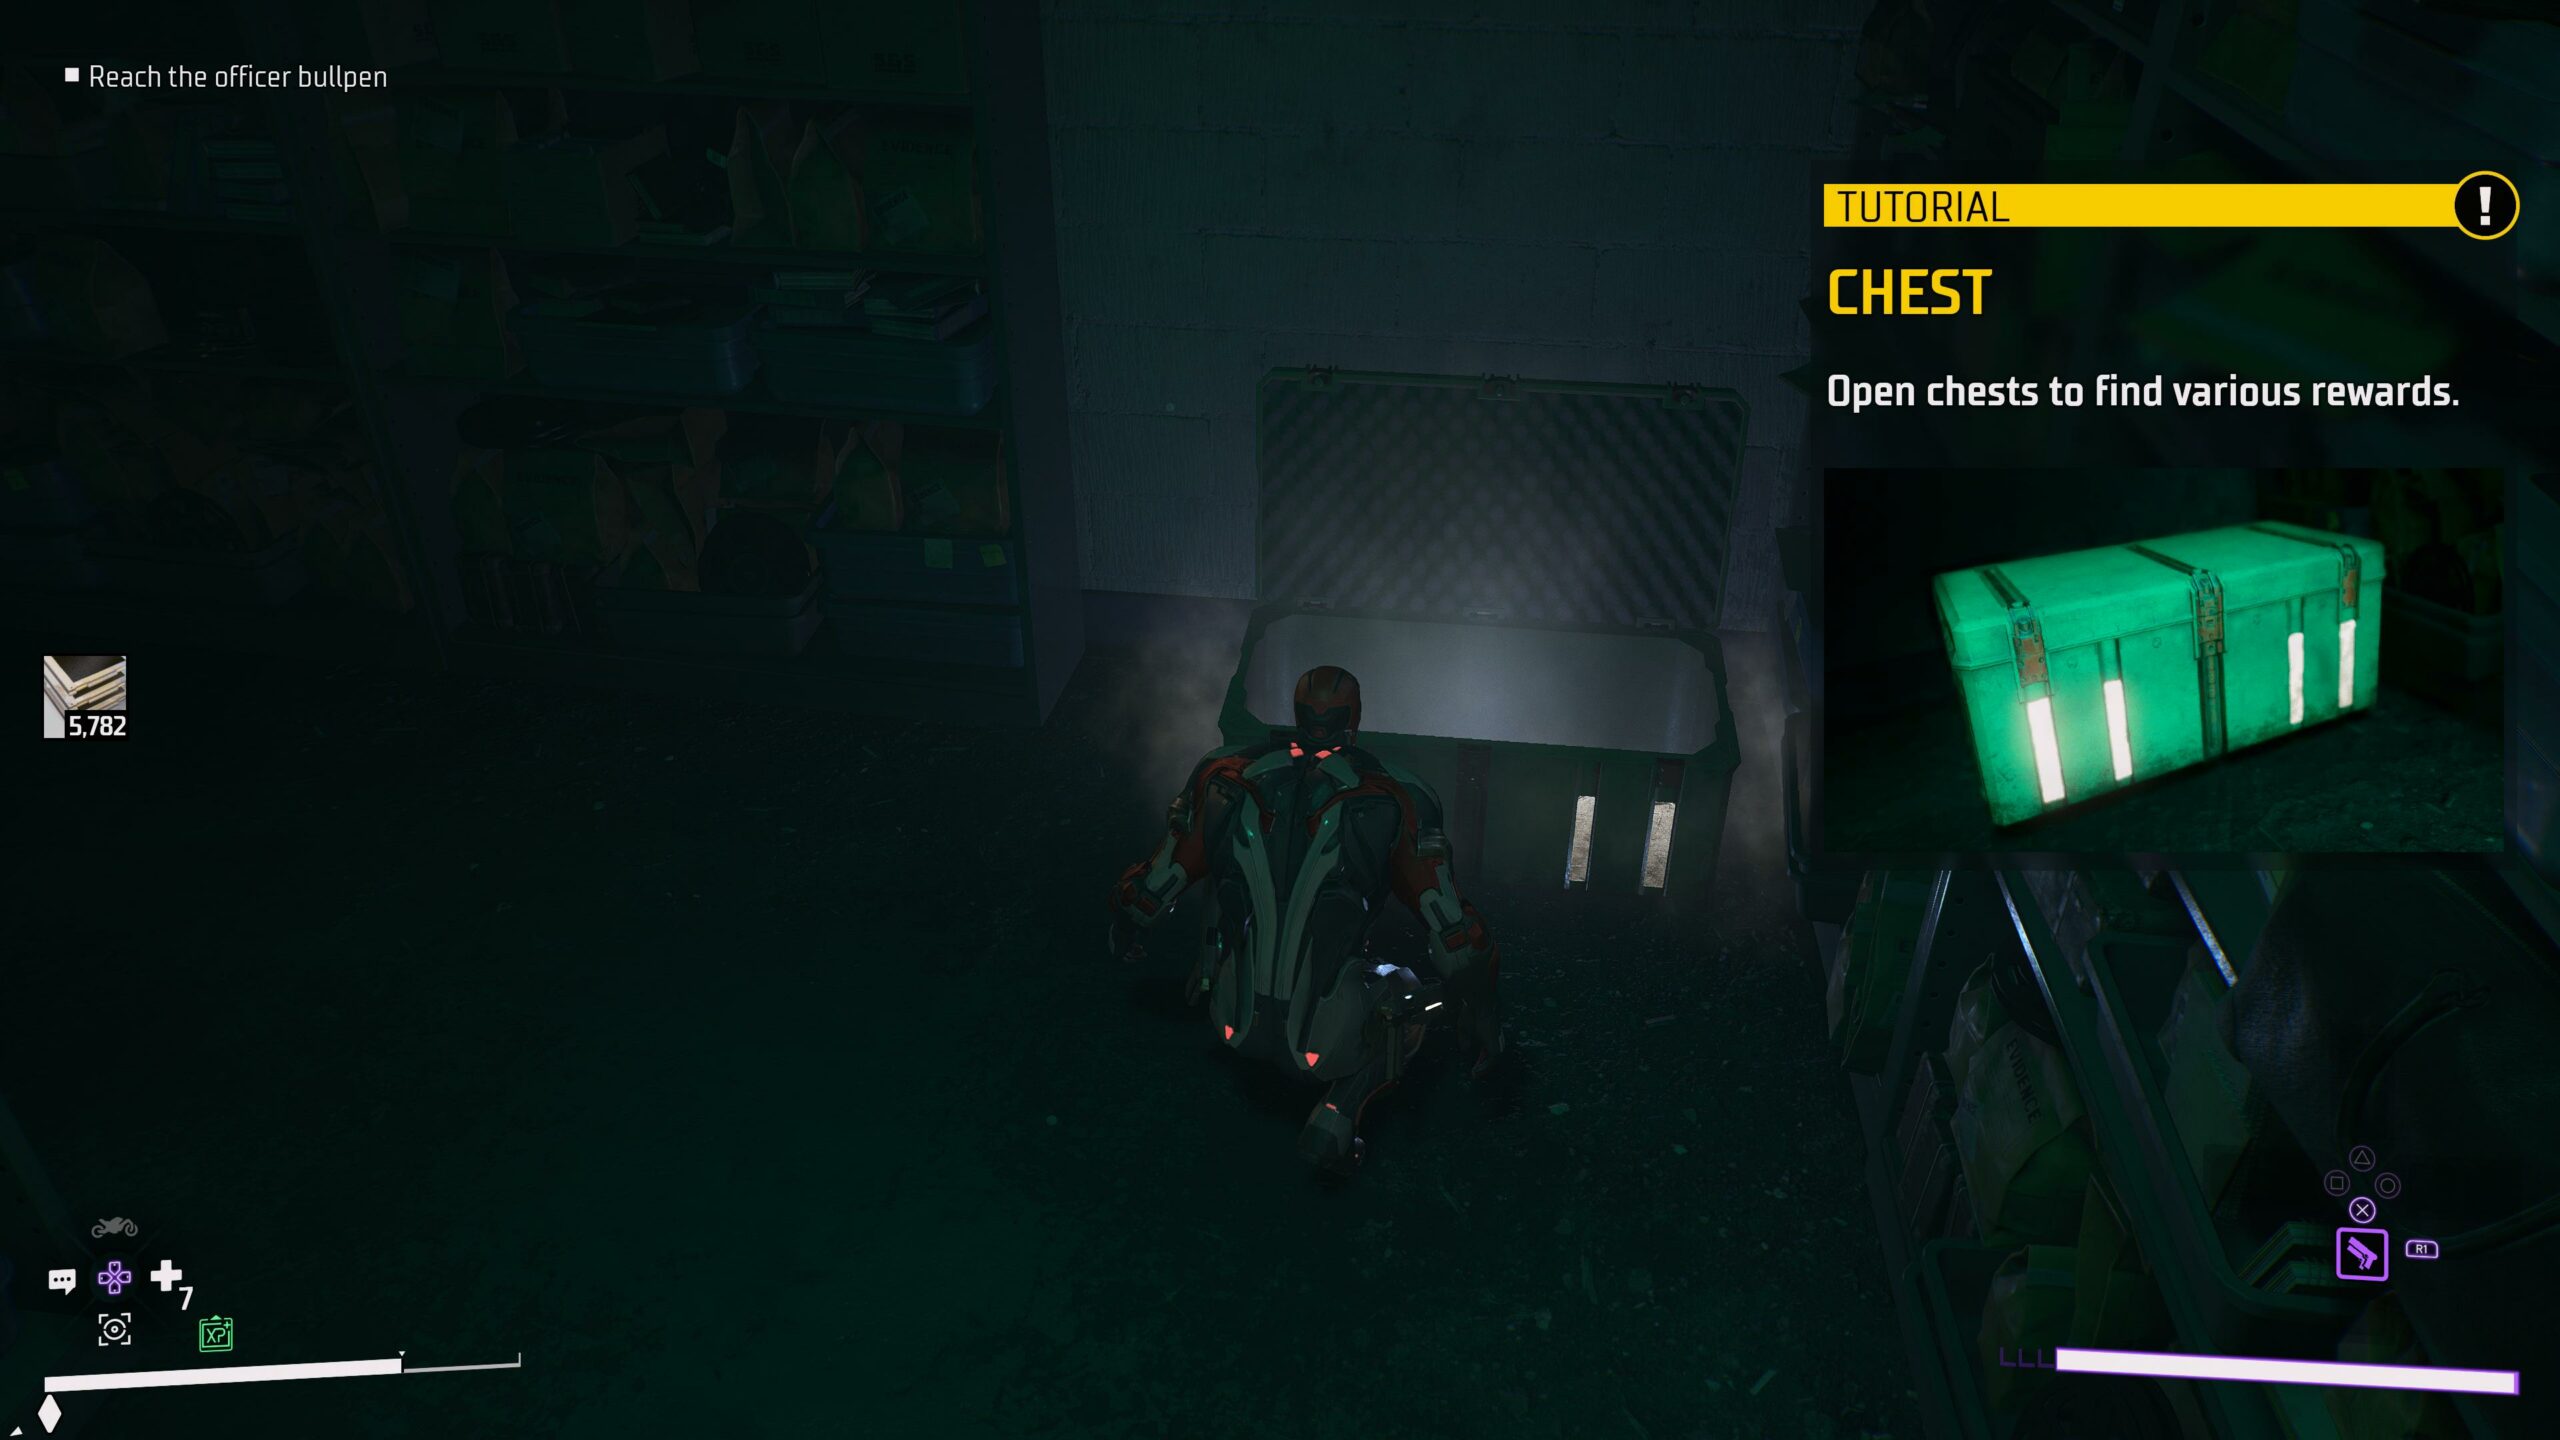 There are also chests in this game... for some reason?